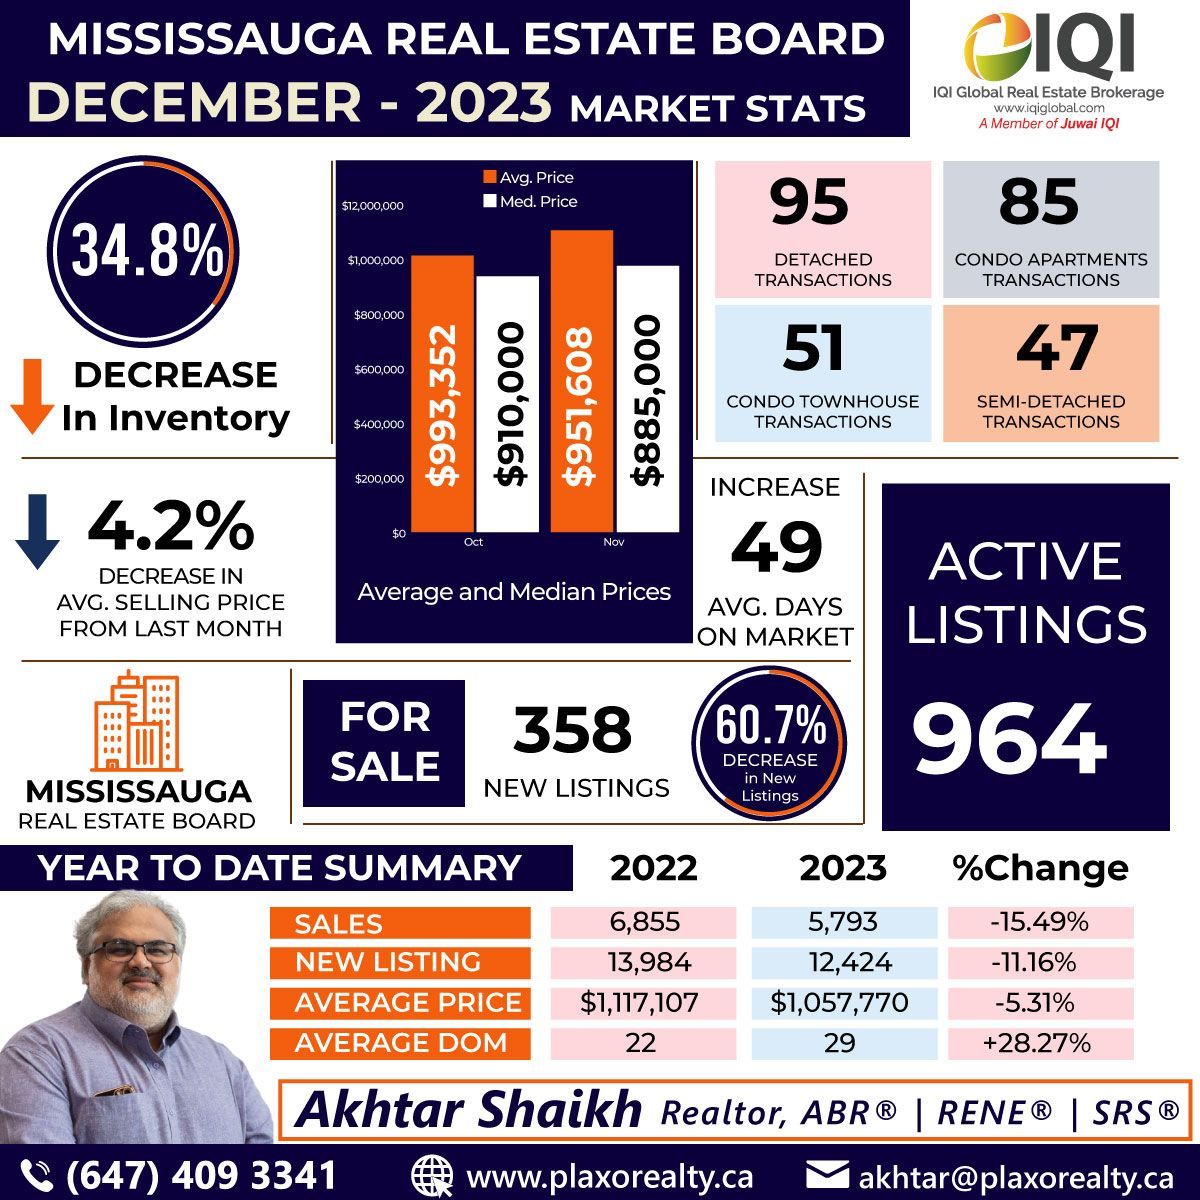 📈 Check out the Real Estate Market Snapshot!
.
#akhtariqi #akhtarshaikh #FTHS #FTHB #firsttimehomebuyer #newhomeowner
#mississaugarealty #mississaugamarket #mississaugarealestate